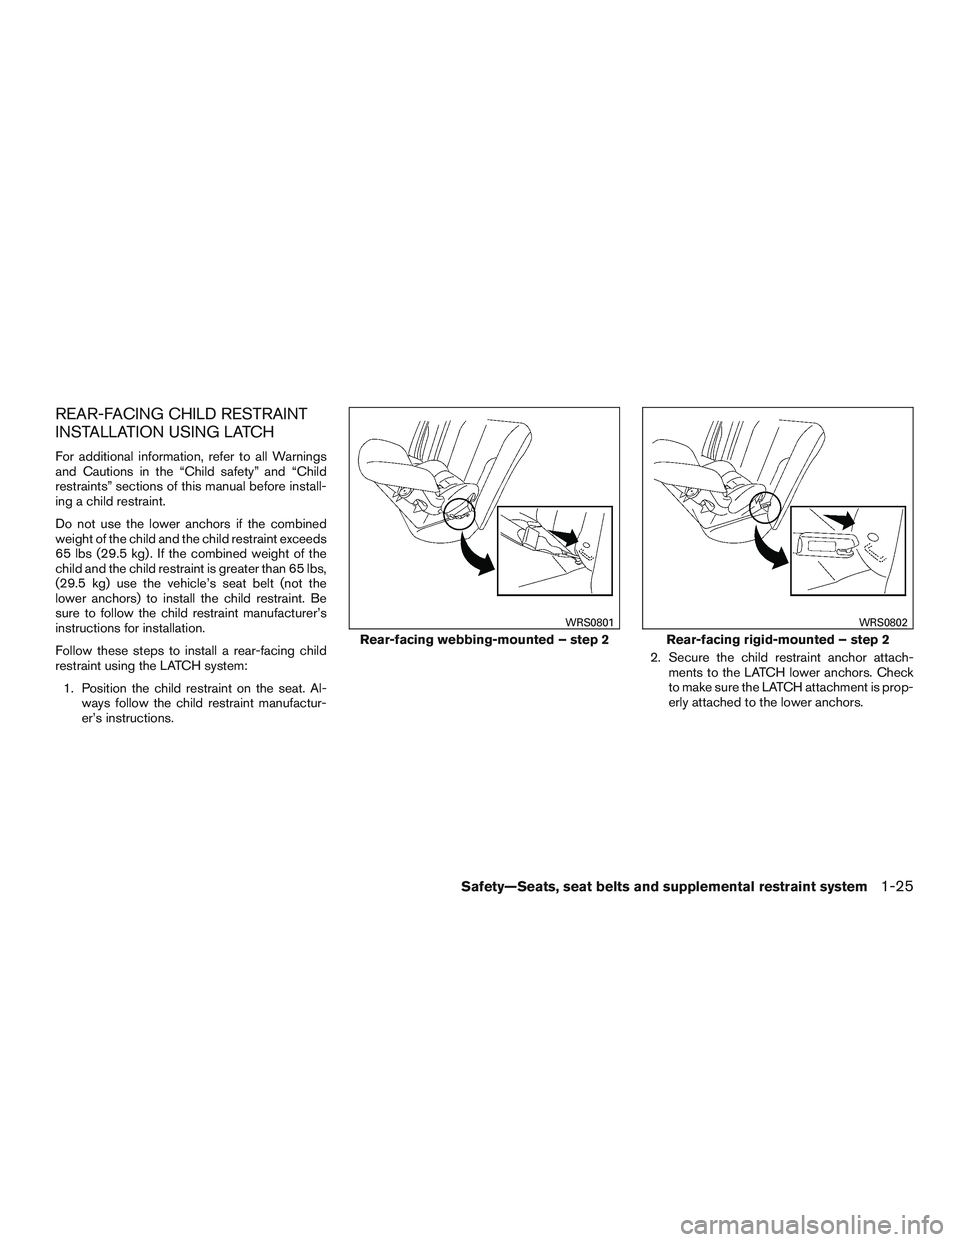 NISSAN ALTIMA SEDAN 2015 Service Manual REAR-FACING CHILD RESTRAINT
INSTALLATION USING LATCH
For additional information, refer to all Warnings
and Cautions in the “Child safety” and “Child
restraints” sections of this manual before 